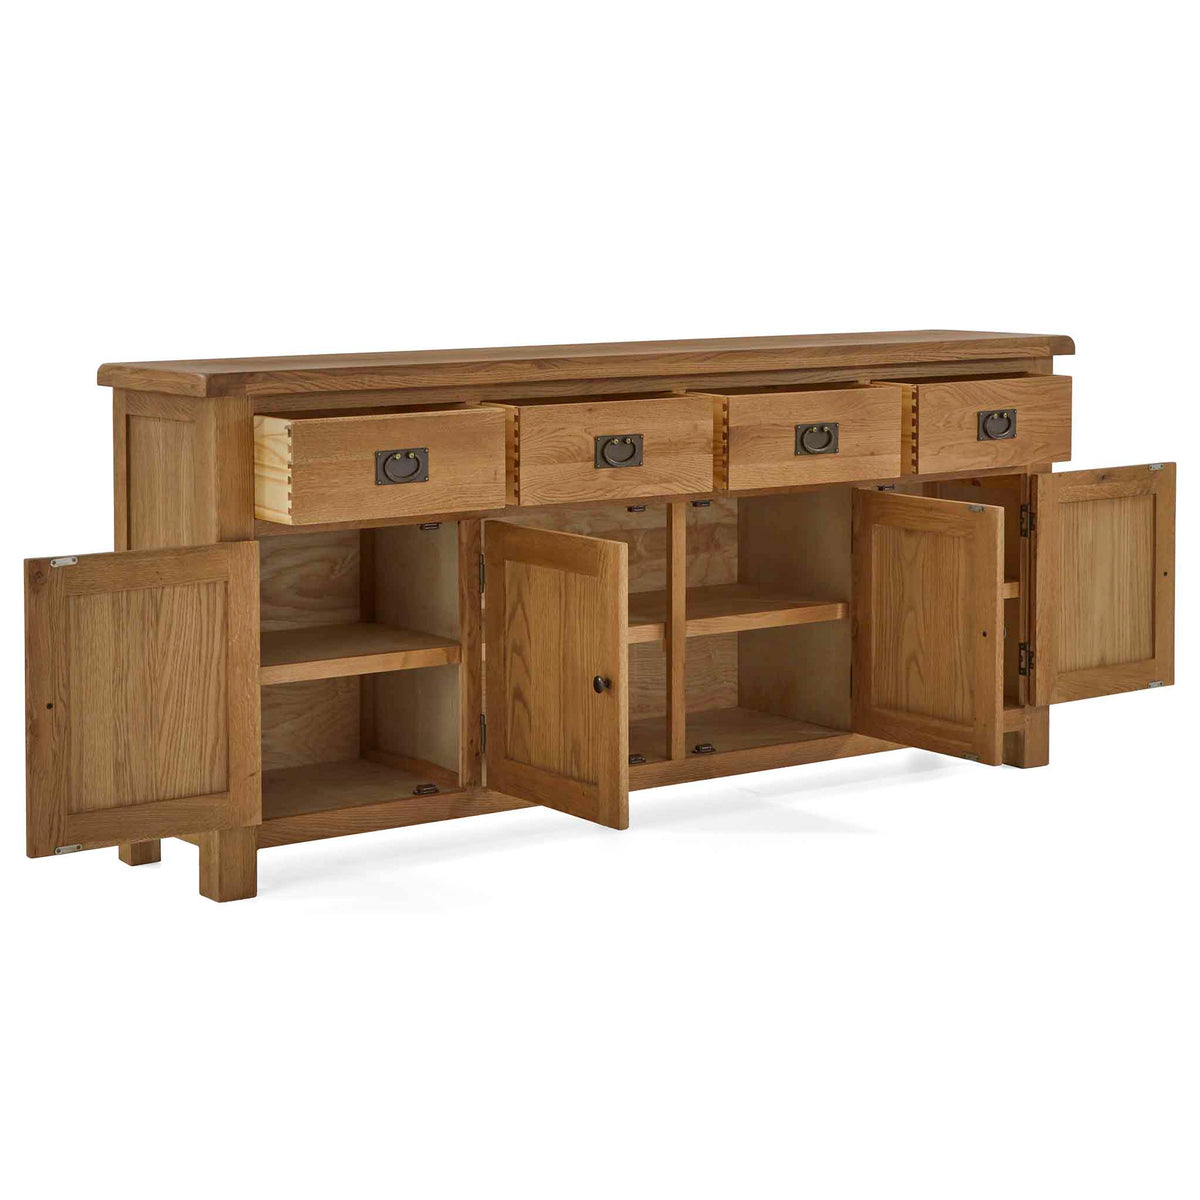 Zelah Oak Extra Large Sideboard - With cupboards and drawers open